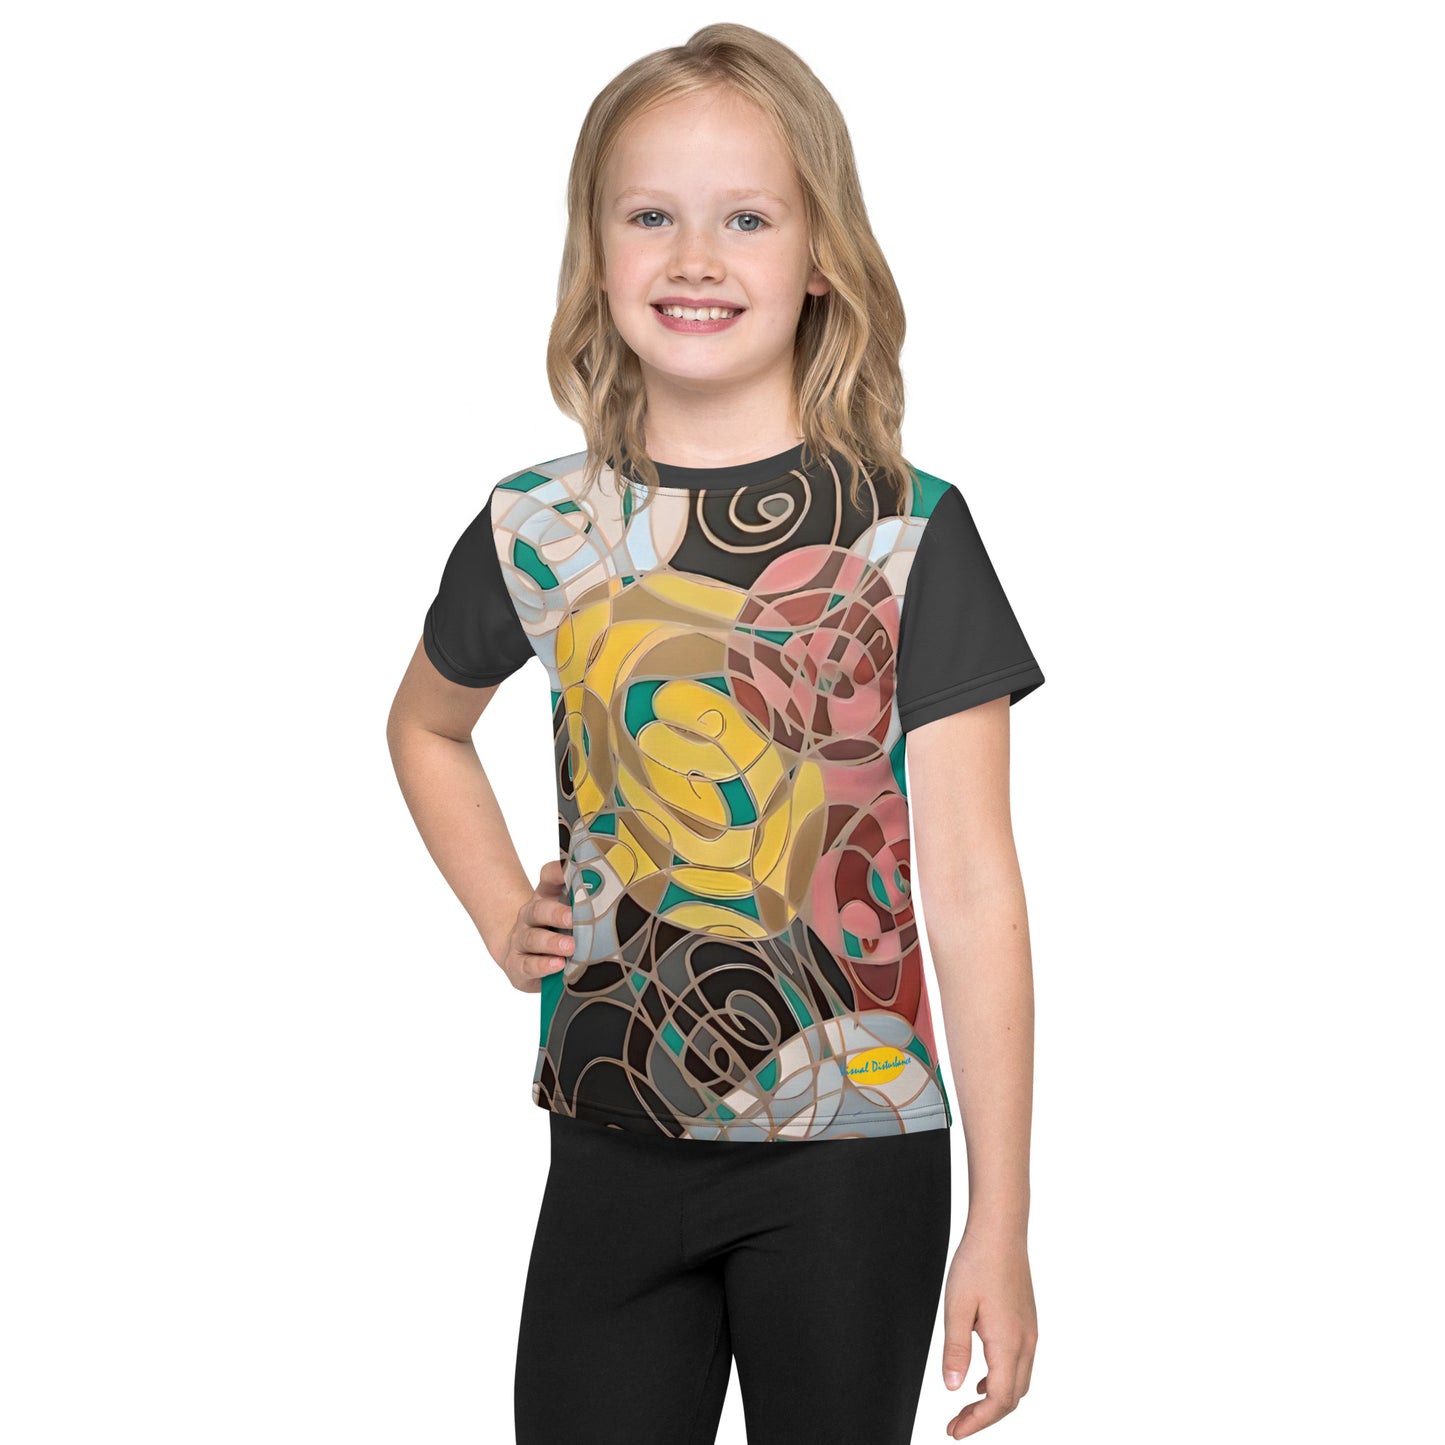 Red and Yellow, Black and White Kids crew neck t-shirt